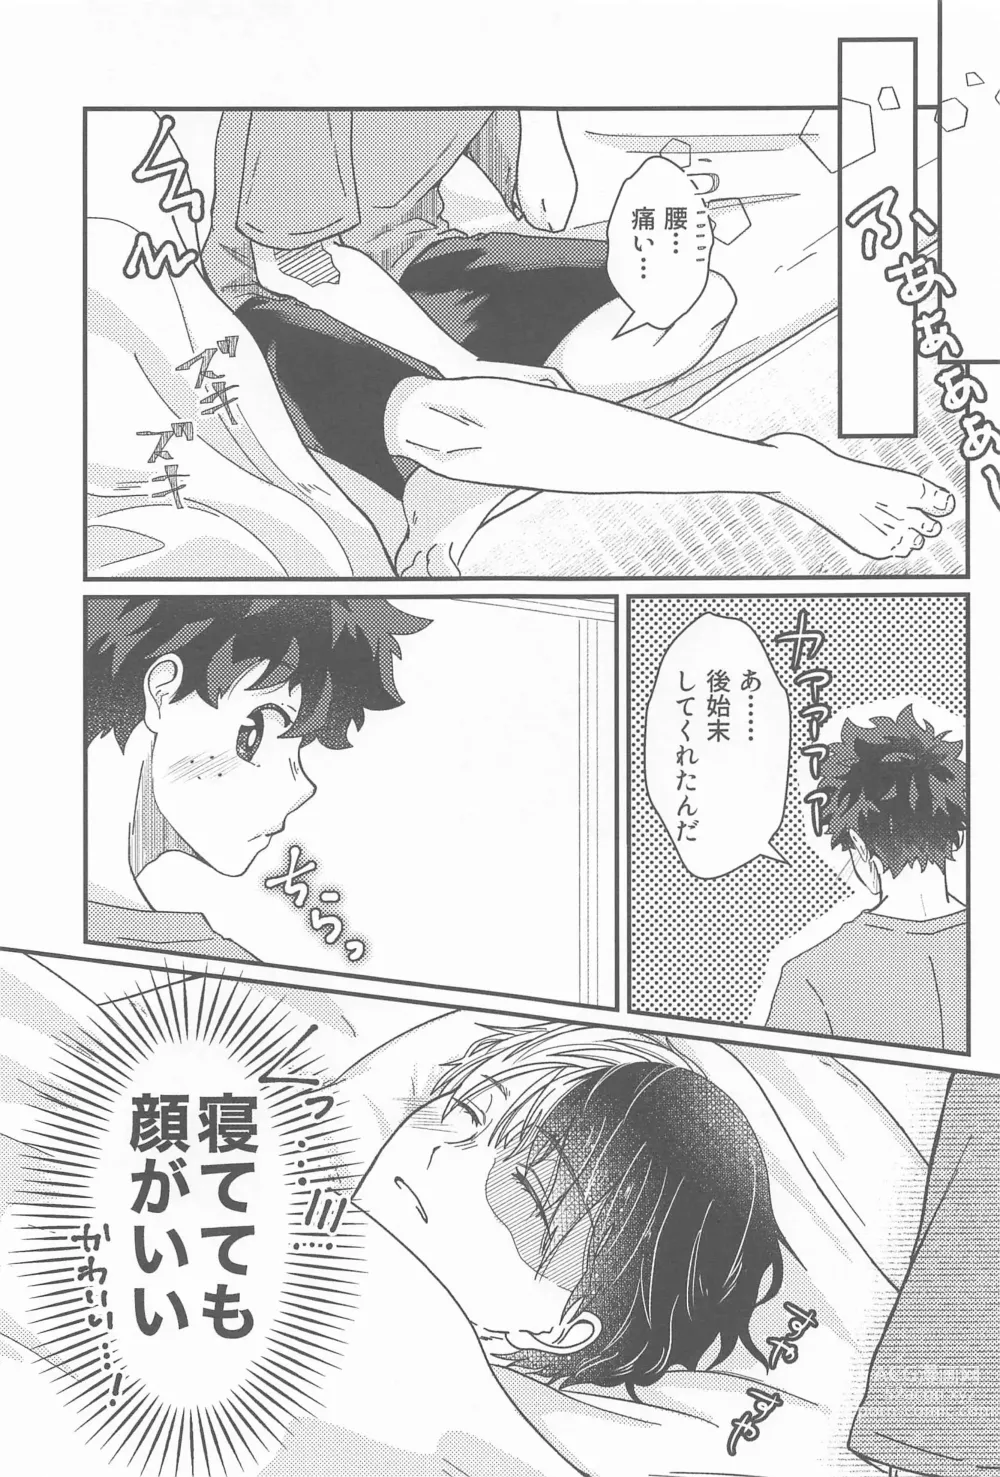 Page 42 of doujinshi Second Sweet